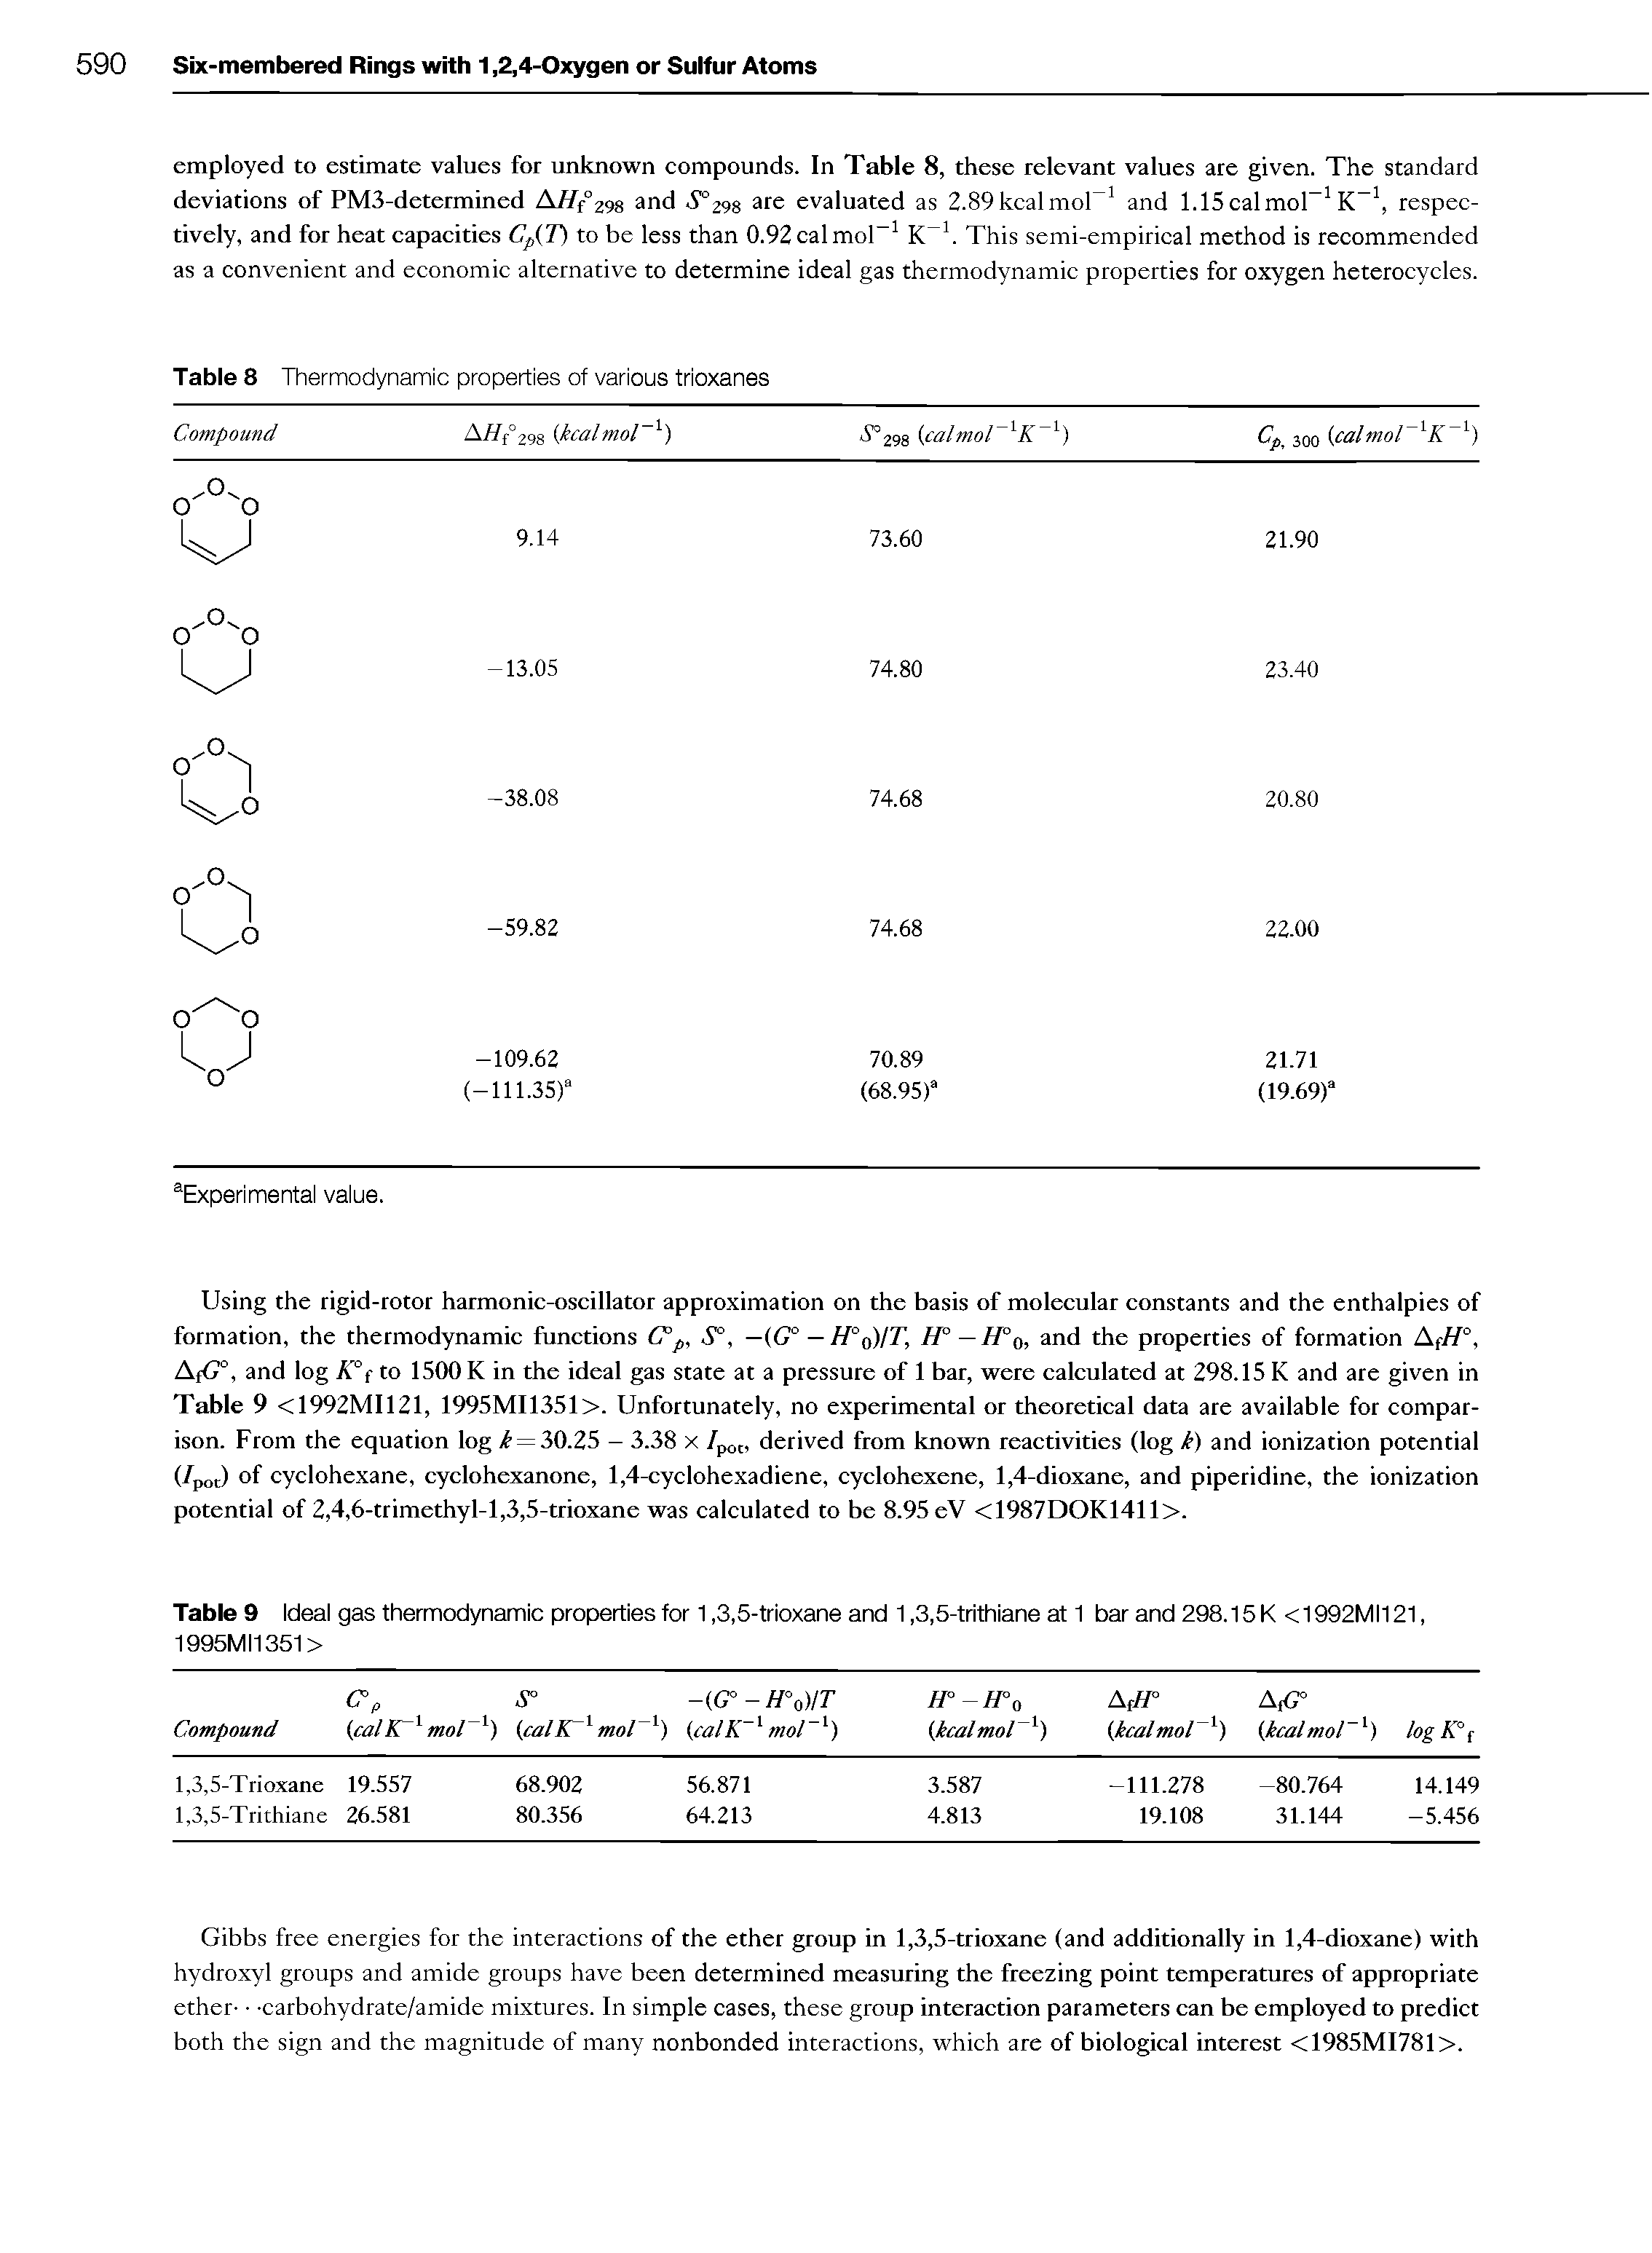 Table 9 Ideal gas thermodynamic properties for 1,3,5-trloxane and 1,3,5-trlthlane at 1 bar and 298.15 K <1992MI121, 1995MI1351>...